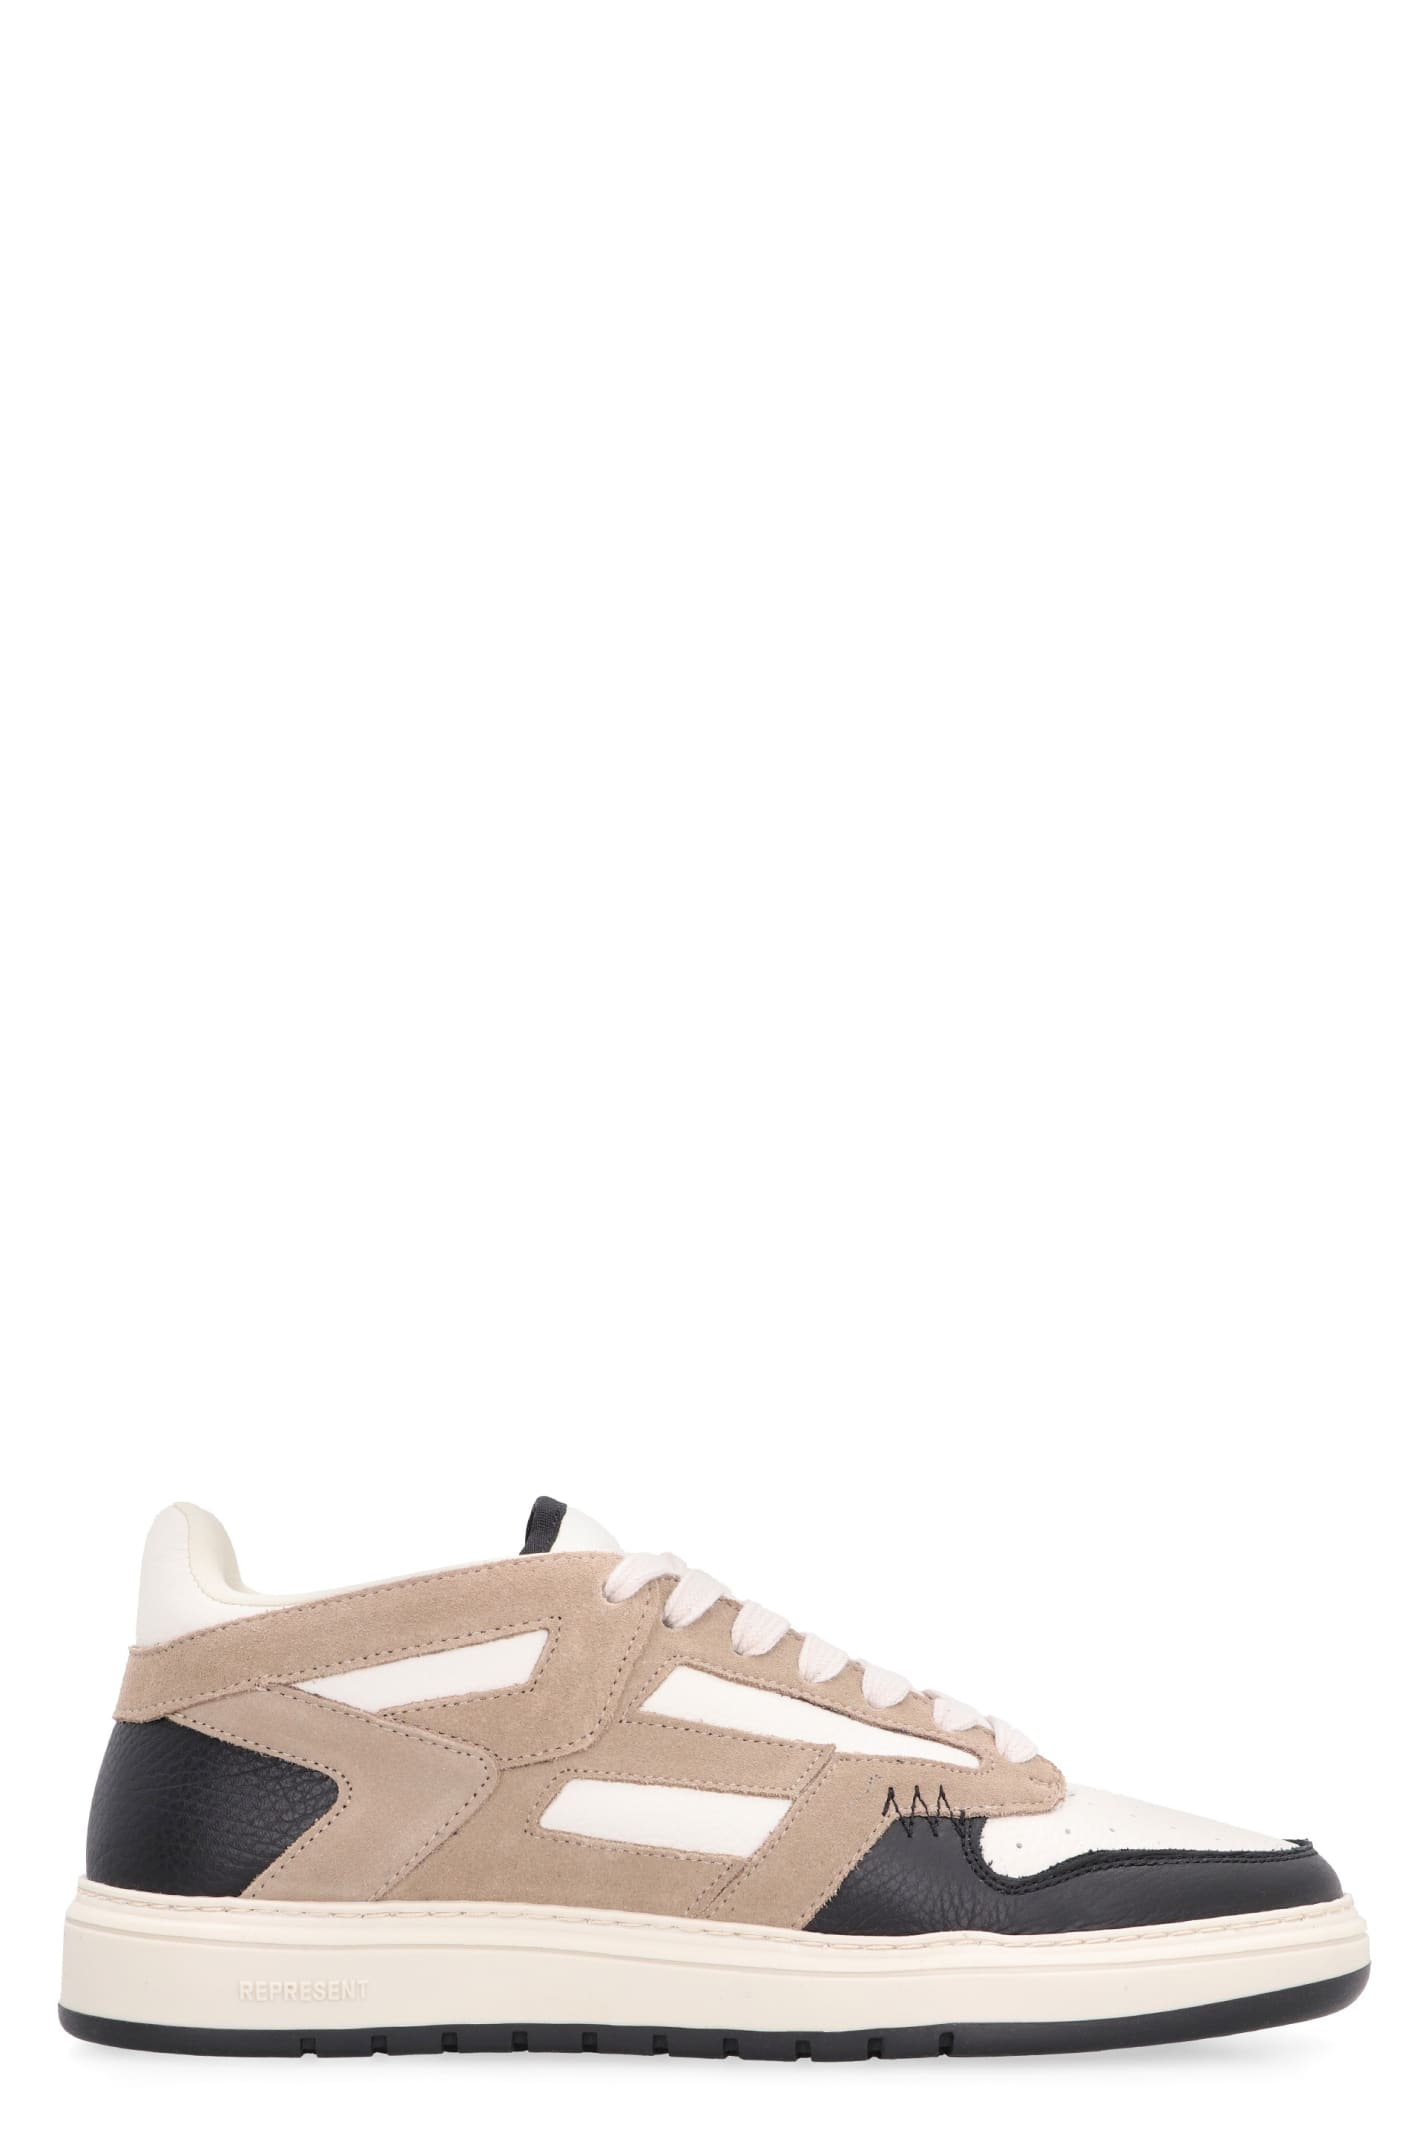 Shop Represent Storm Leather Low-top Sneakers In White And Black